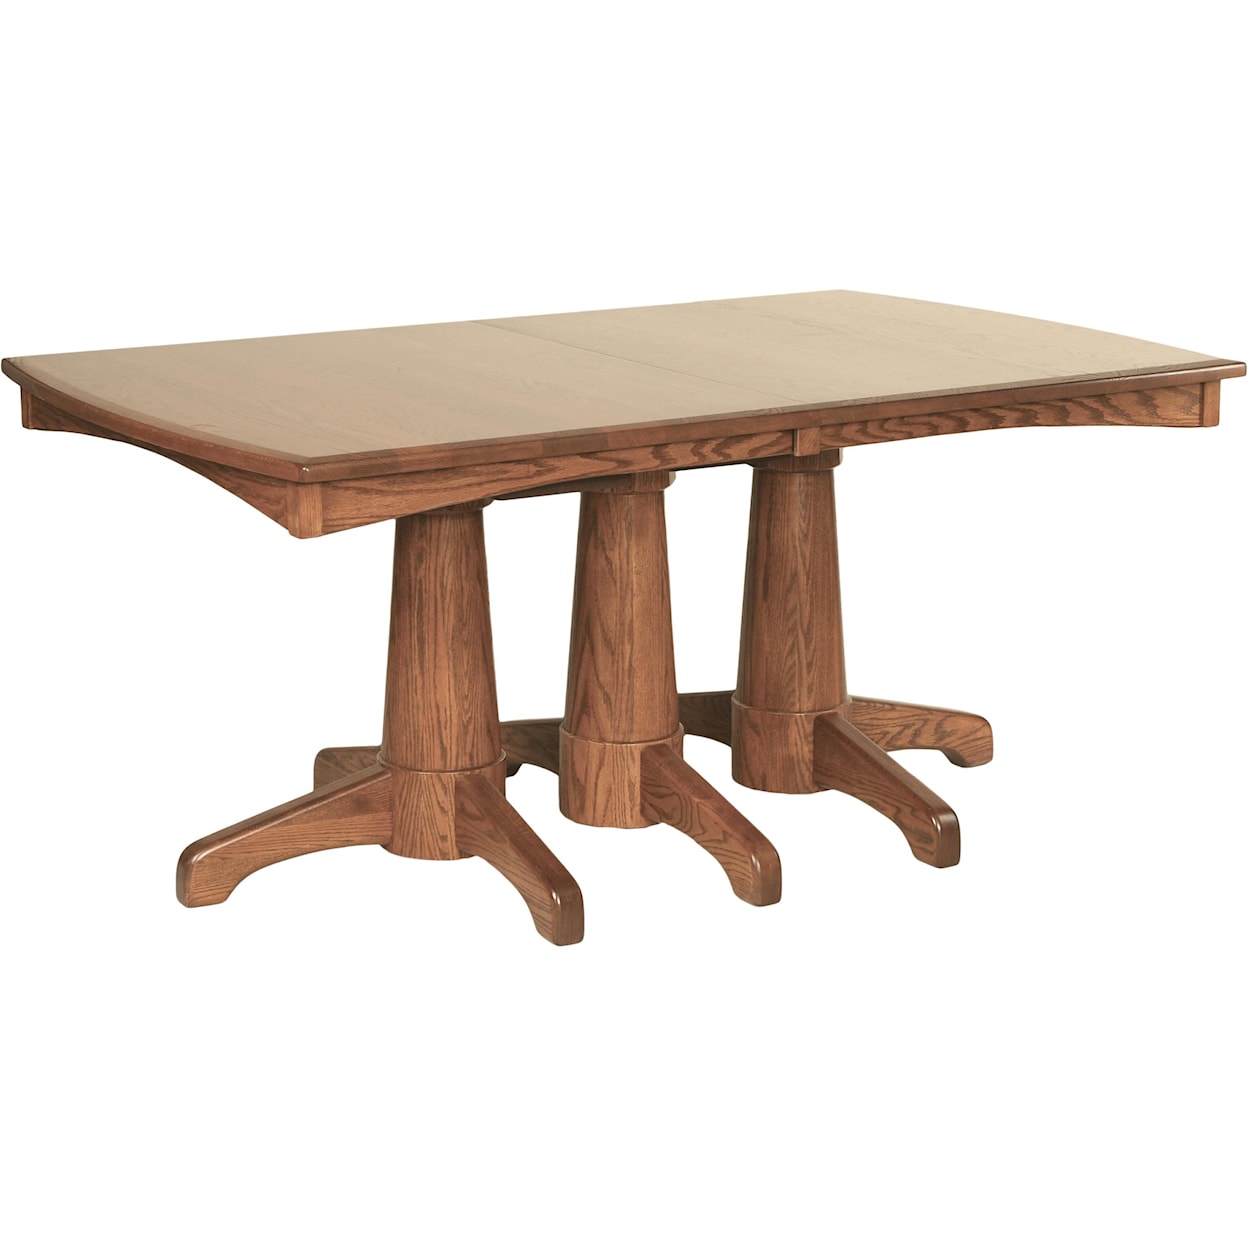 Oakwood Industries Lighthouse Dining Table